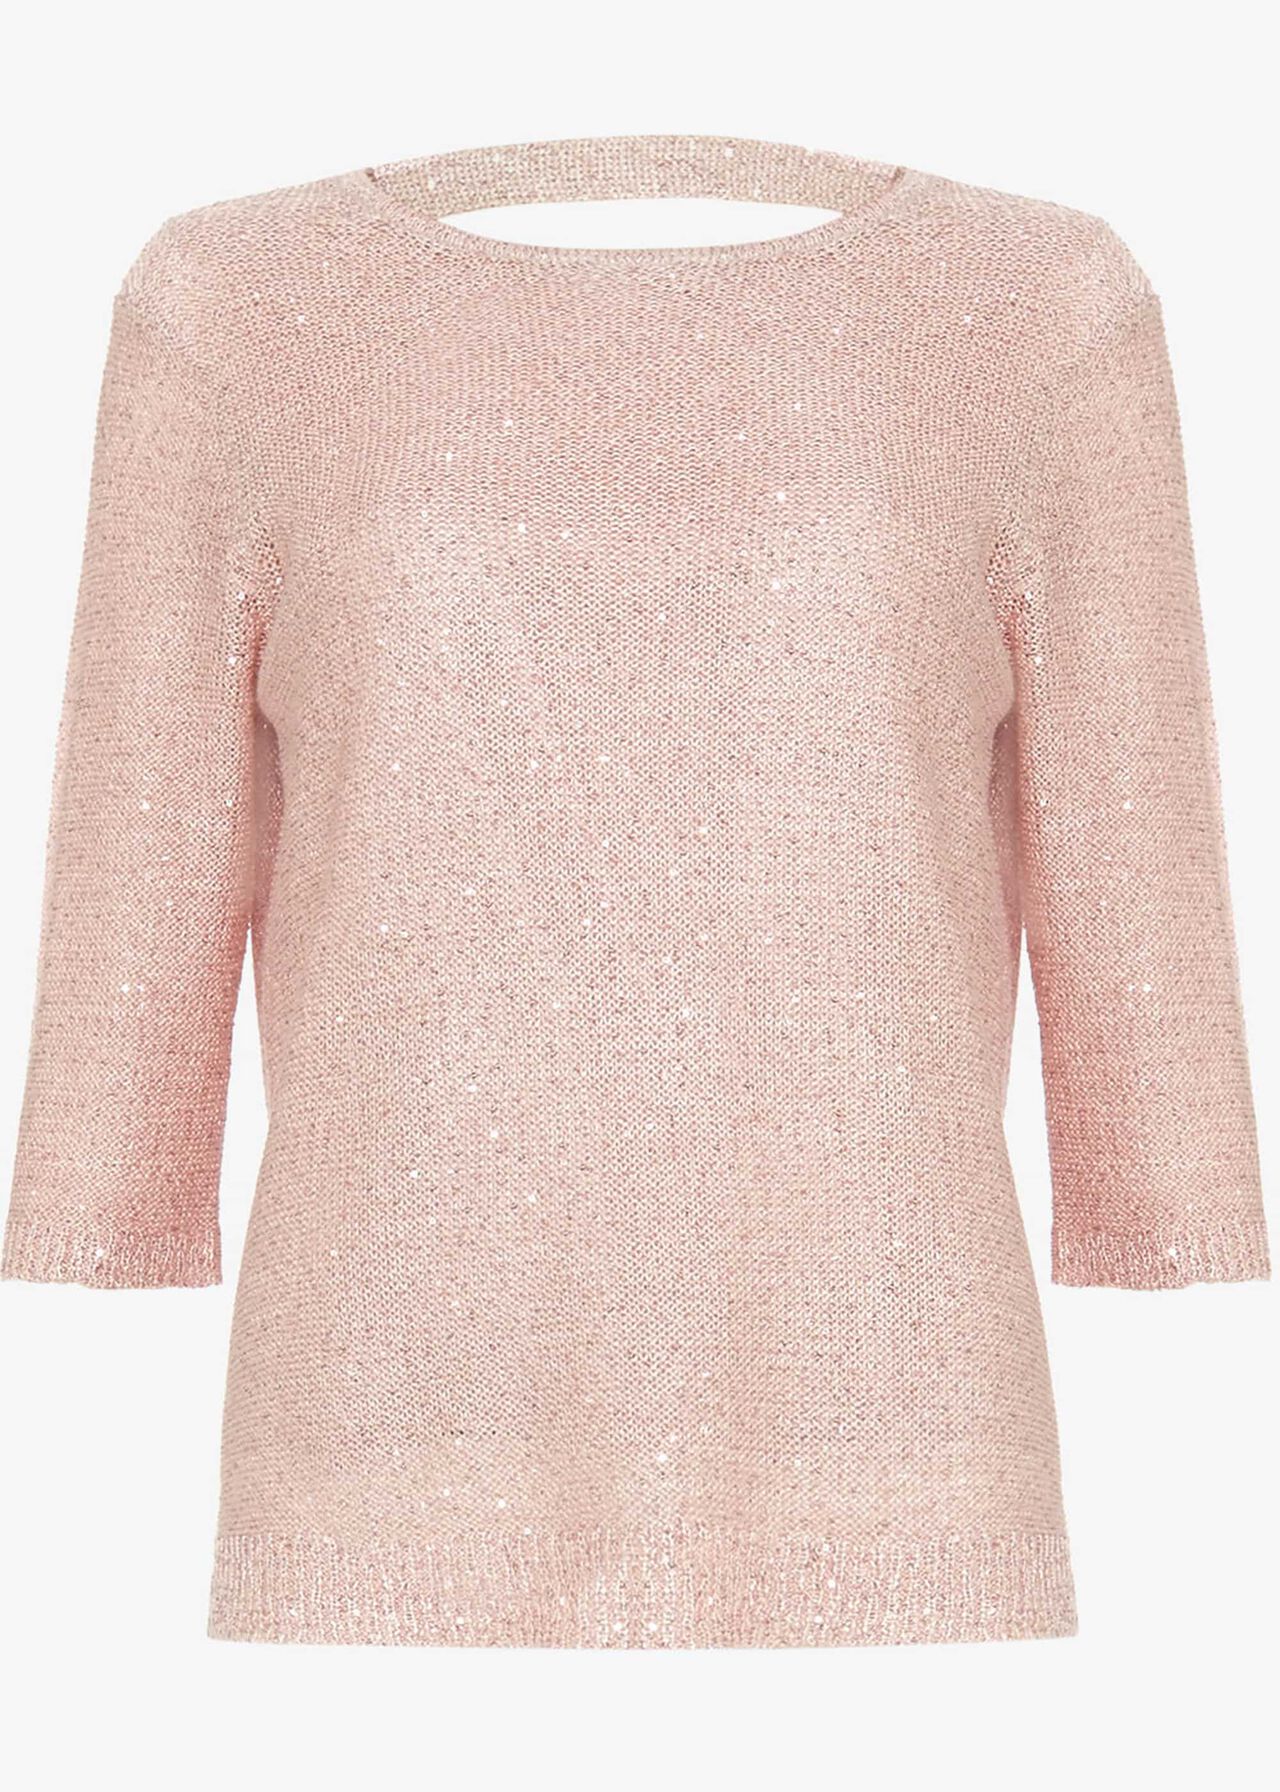 Caley Sequin Knitted Top